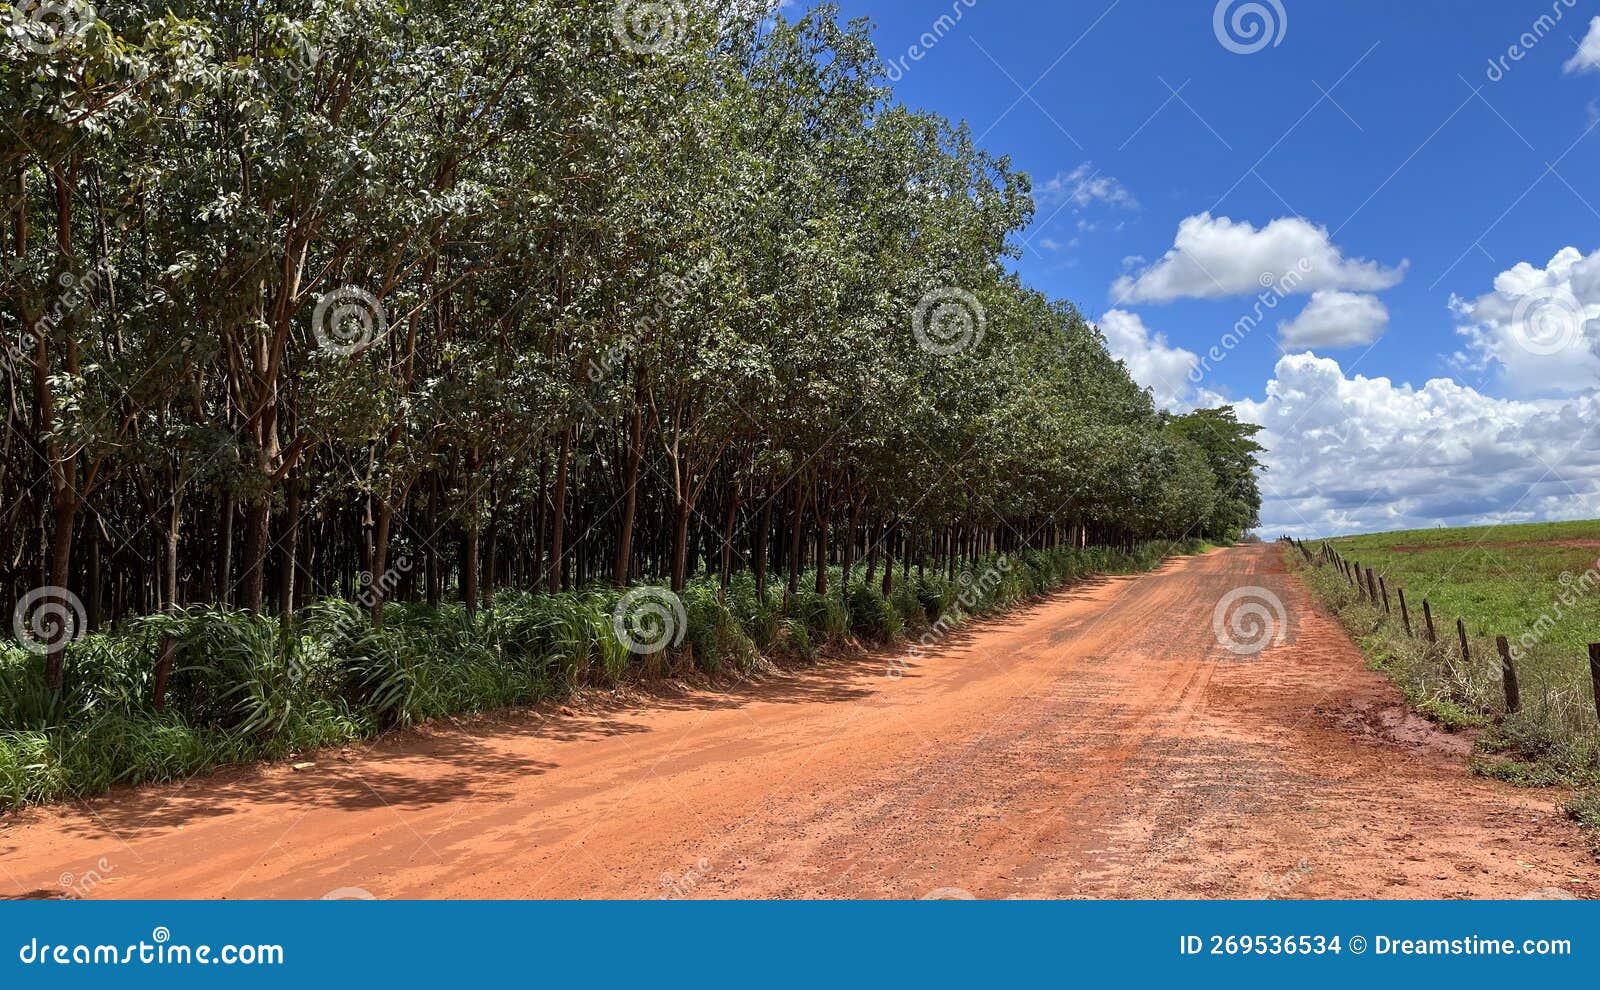 dirt road in the hinterland